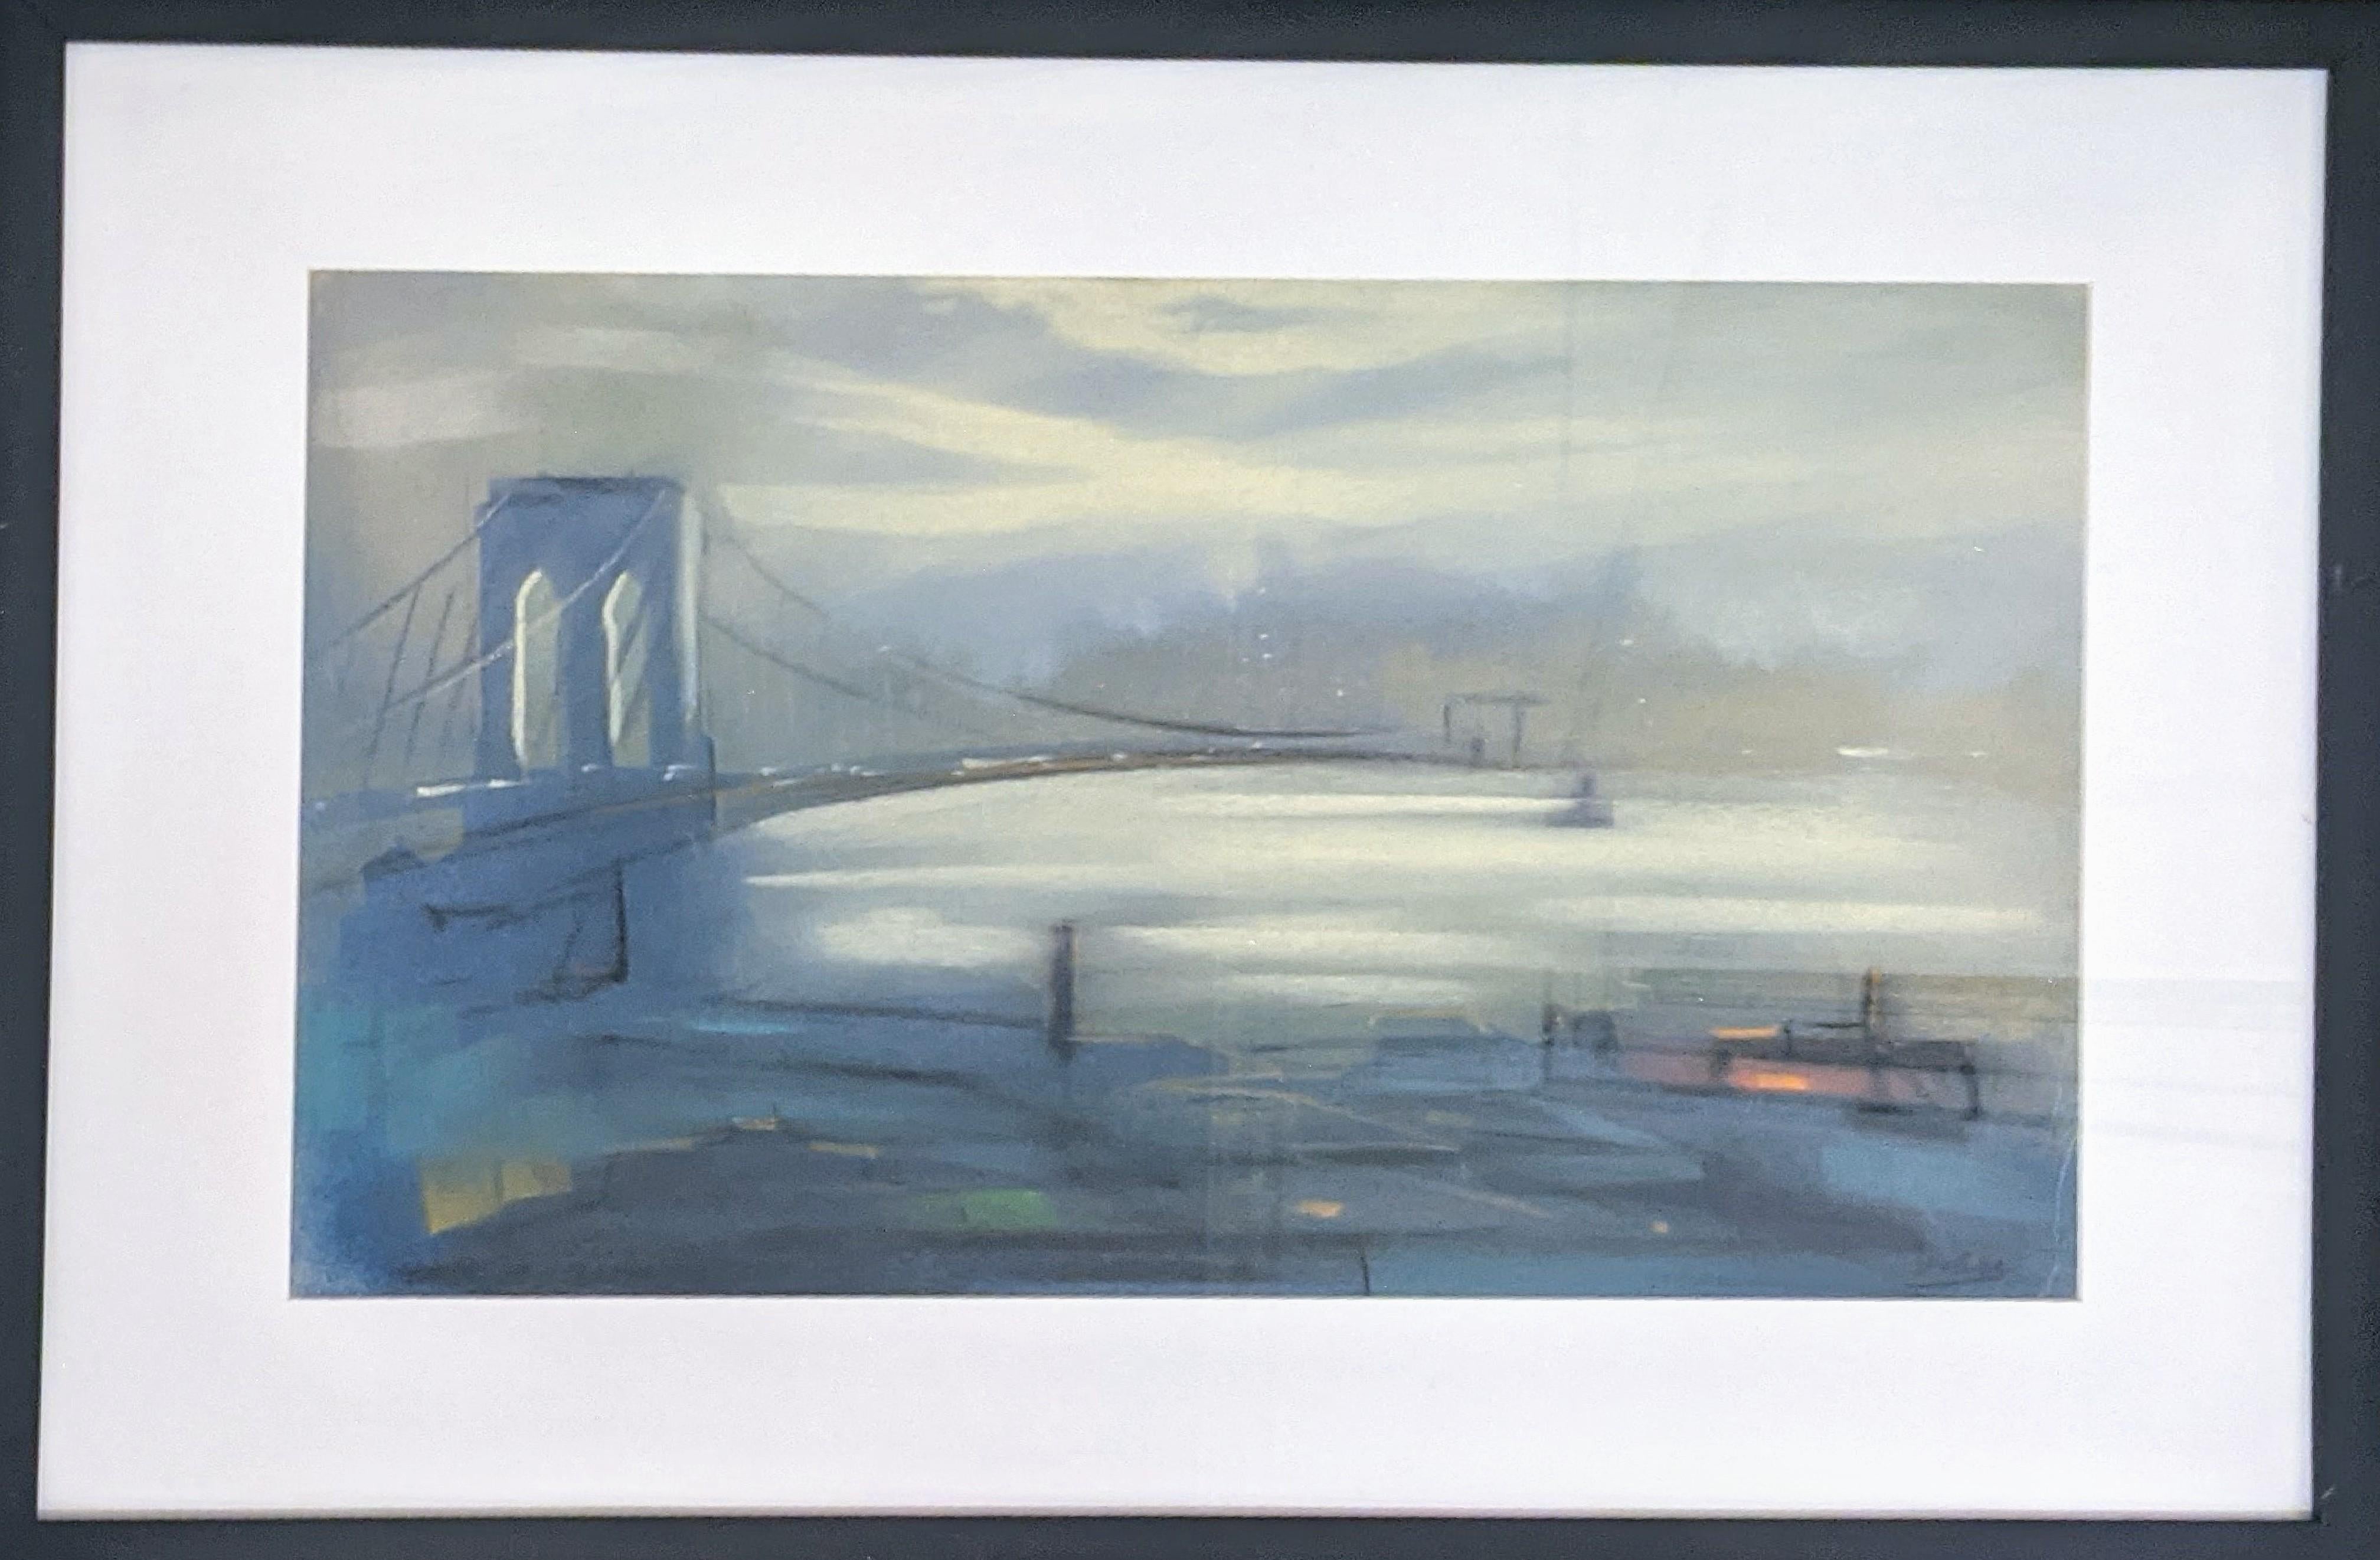 Leon Dolice (1892 - 1960)
New York Harbor (Brooklyn Bridge), circa 1930-40
Pastel on paper
12 x 19 inches
Signed lower right

Provenance:
Spanierman Gallery, New York

The romantic backdrop of Vienna at the turn of the century had a life-long